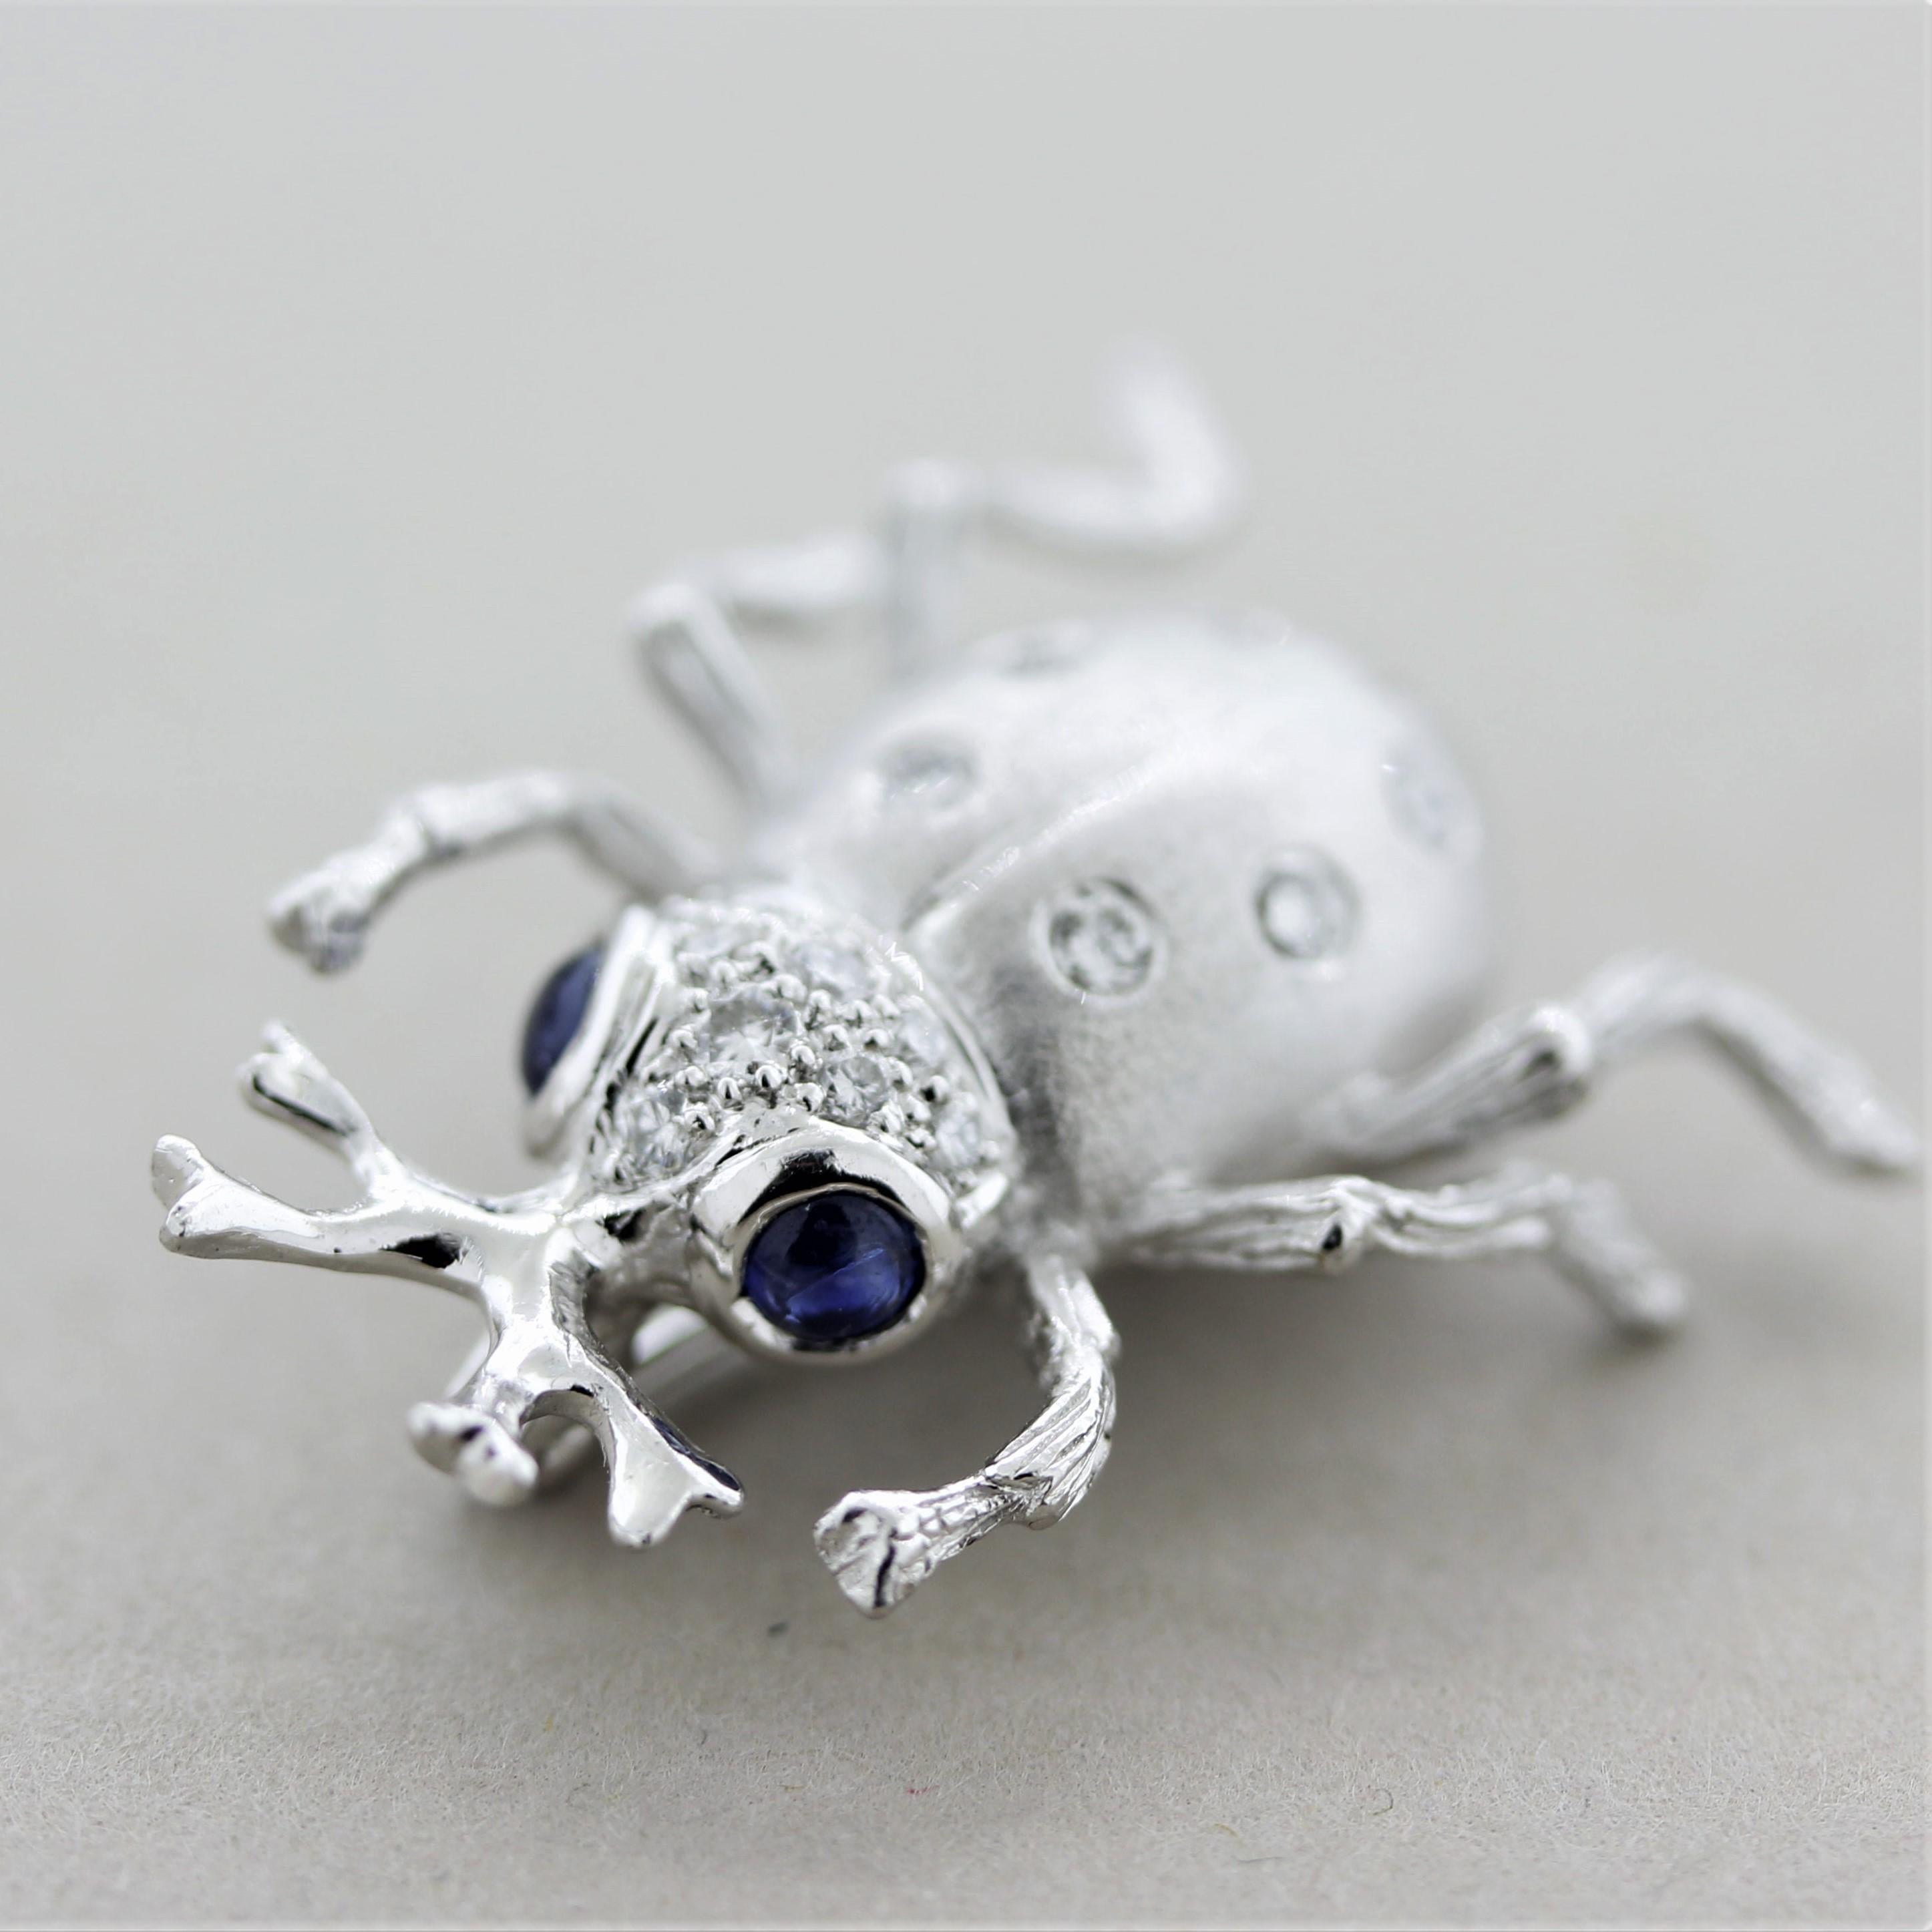 A sweet critter ready to accompany you on your next outing! It features 0.25 carats of round brilliant-cut diamonds set around the beetle’s body along with 2 cabochon sapphires used as its eyes which weigh 0.26 carats. Made in platinum and light